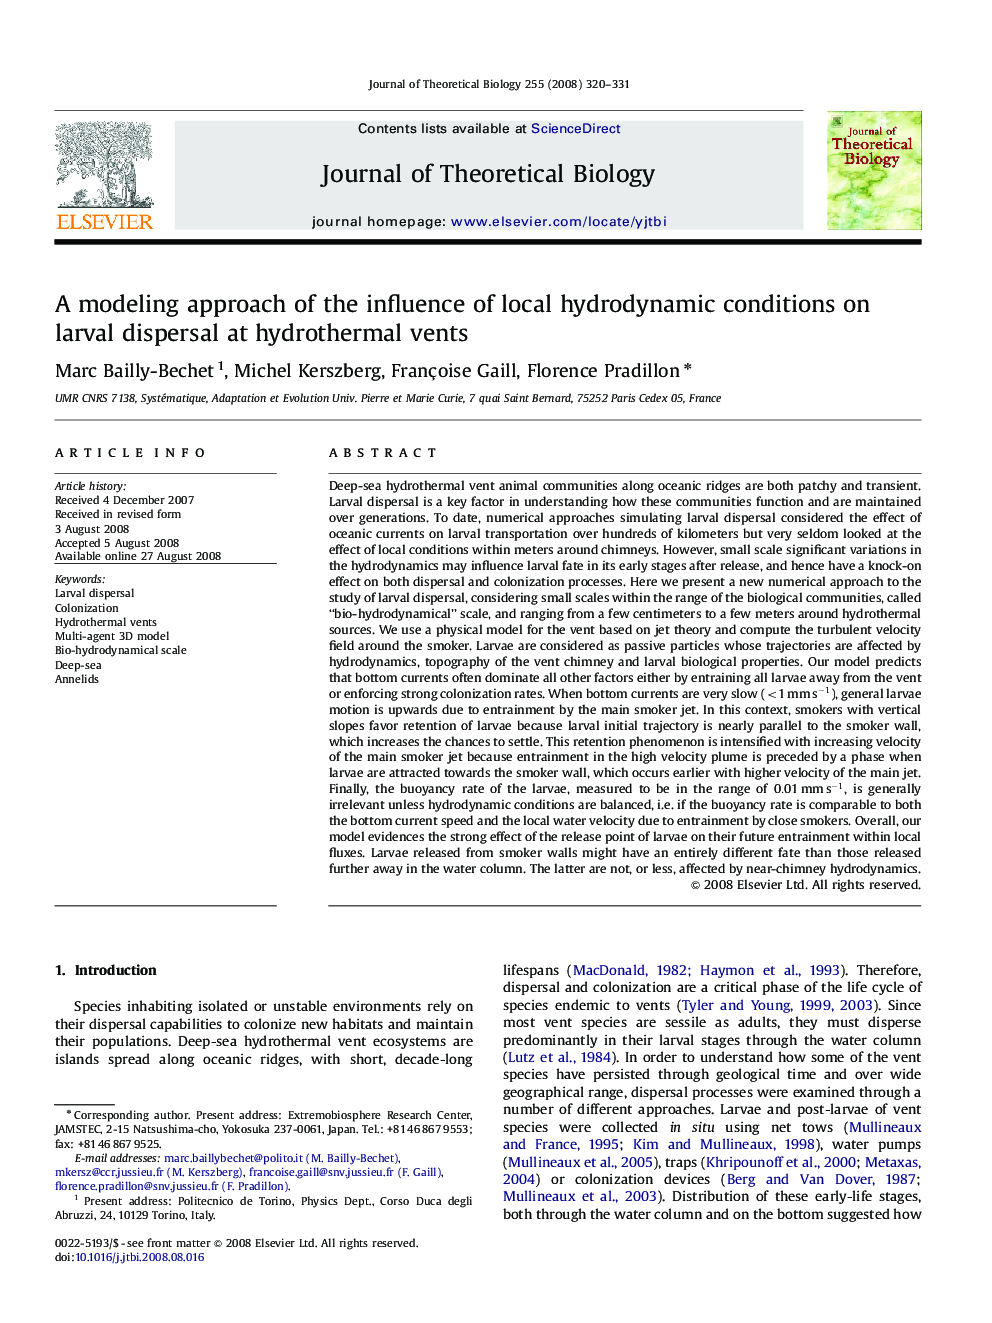 A modeling approach of the influence of local hydrodynamic conditions on larval dispersal at hydrothermal vents